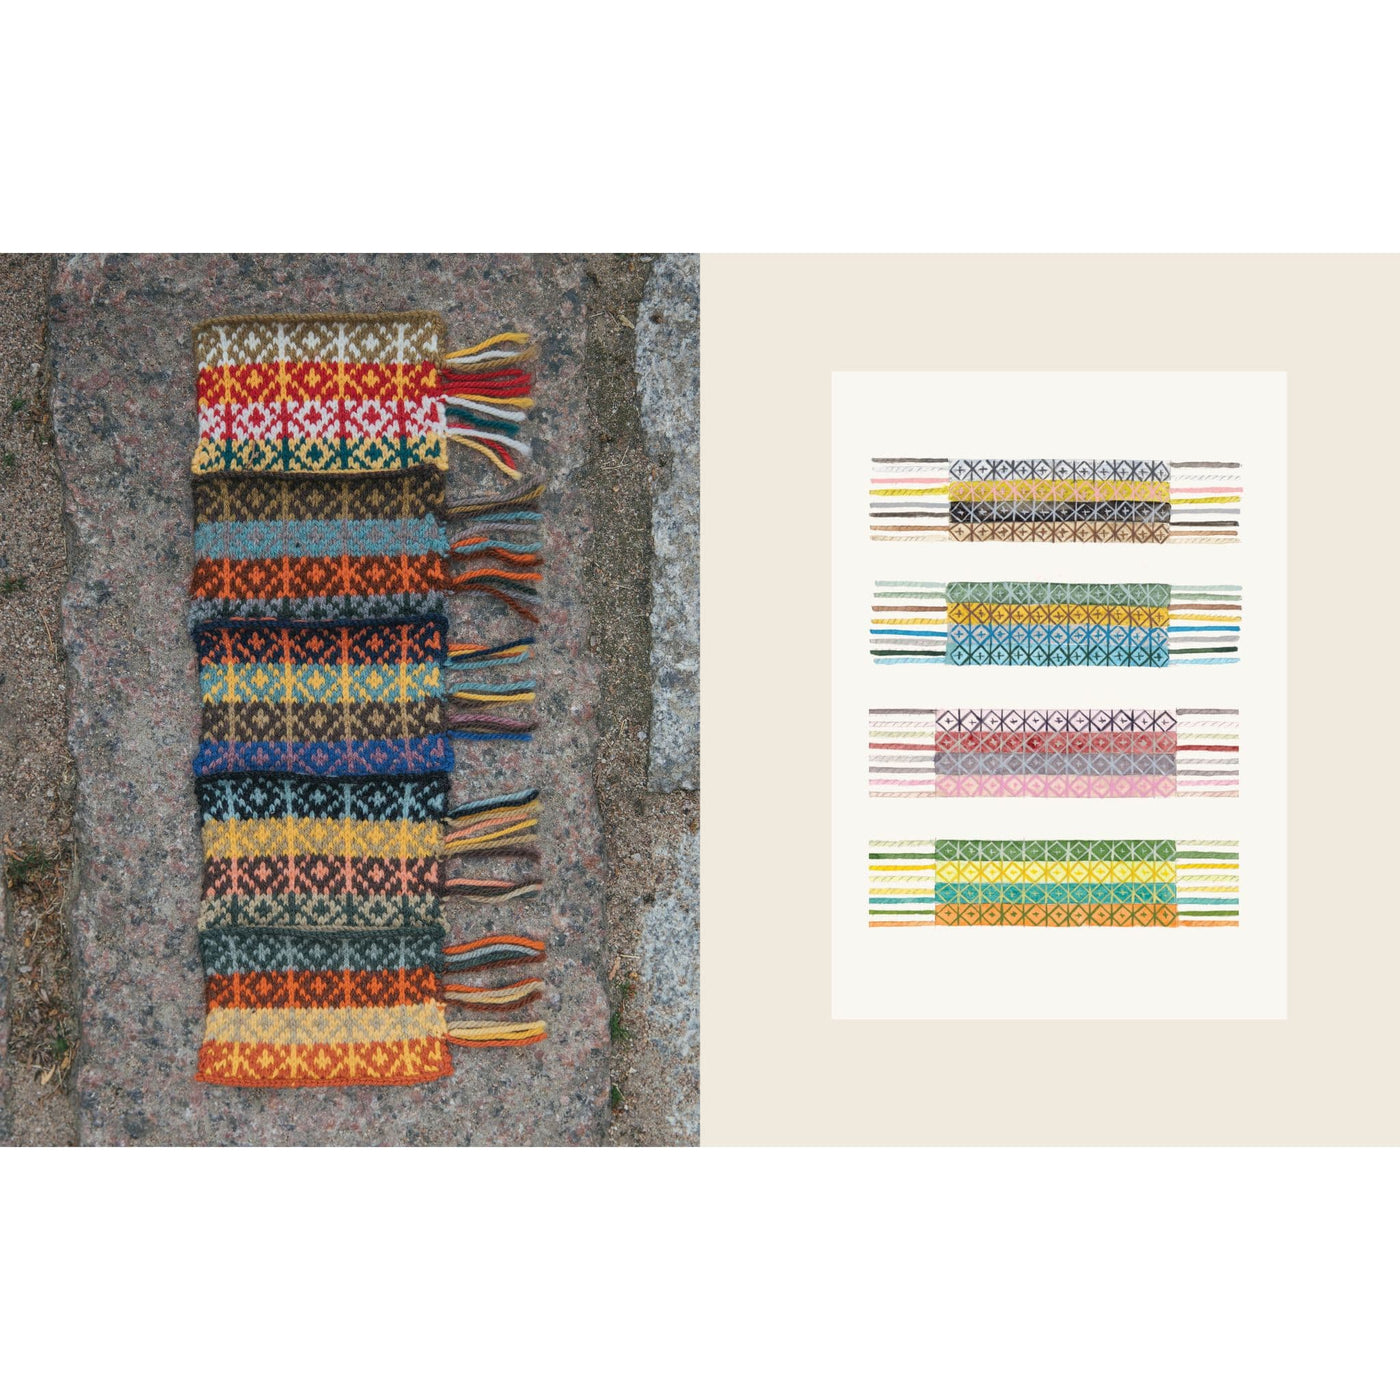 Page from The Knitted Fabric by Dee Hardwicke with a colorful series of swatched patterns